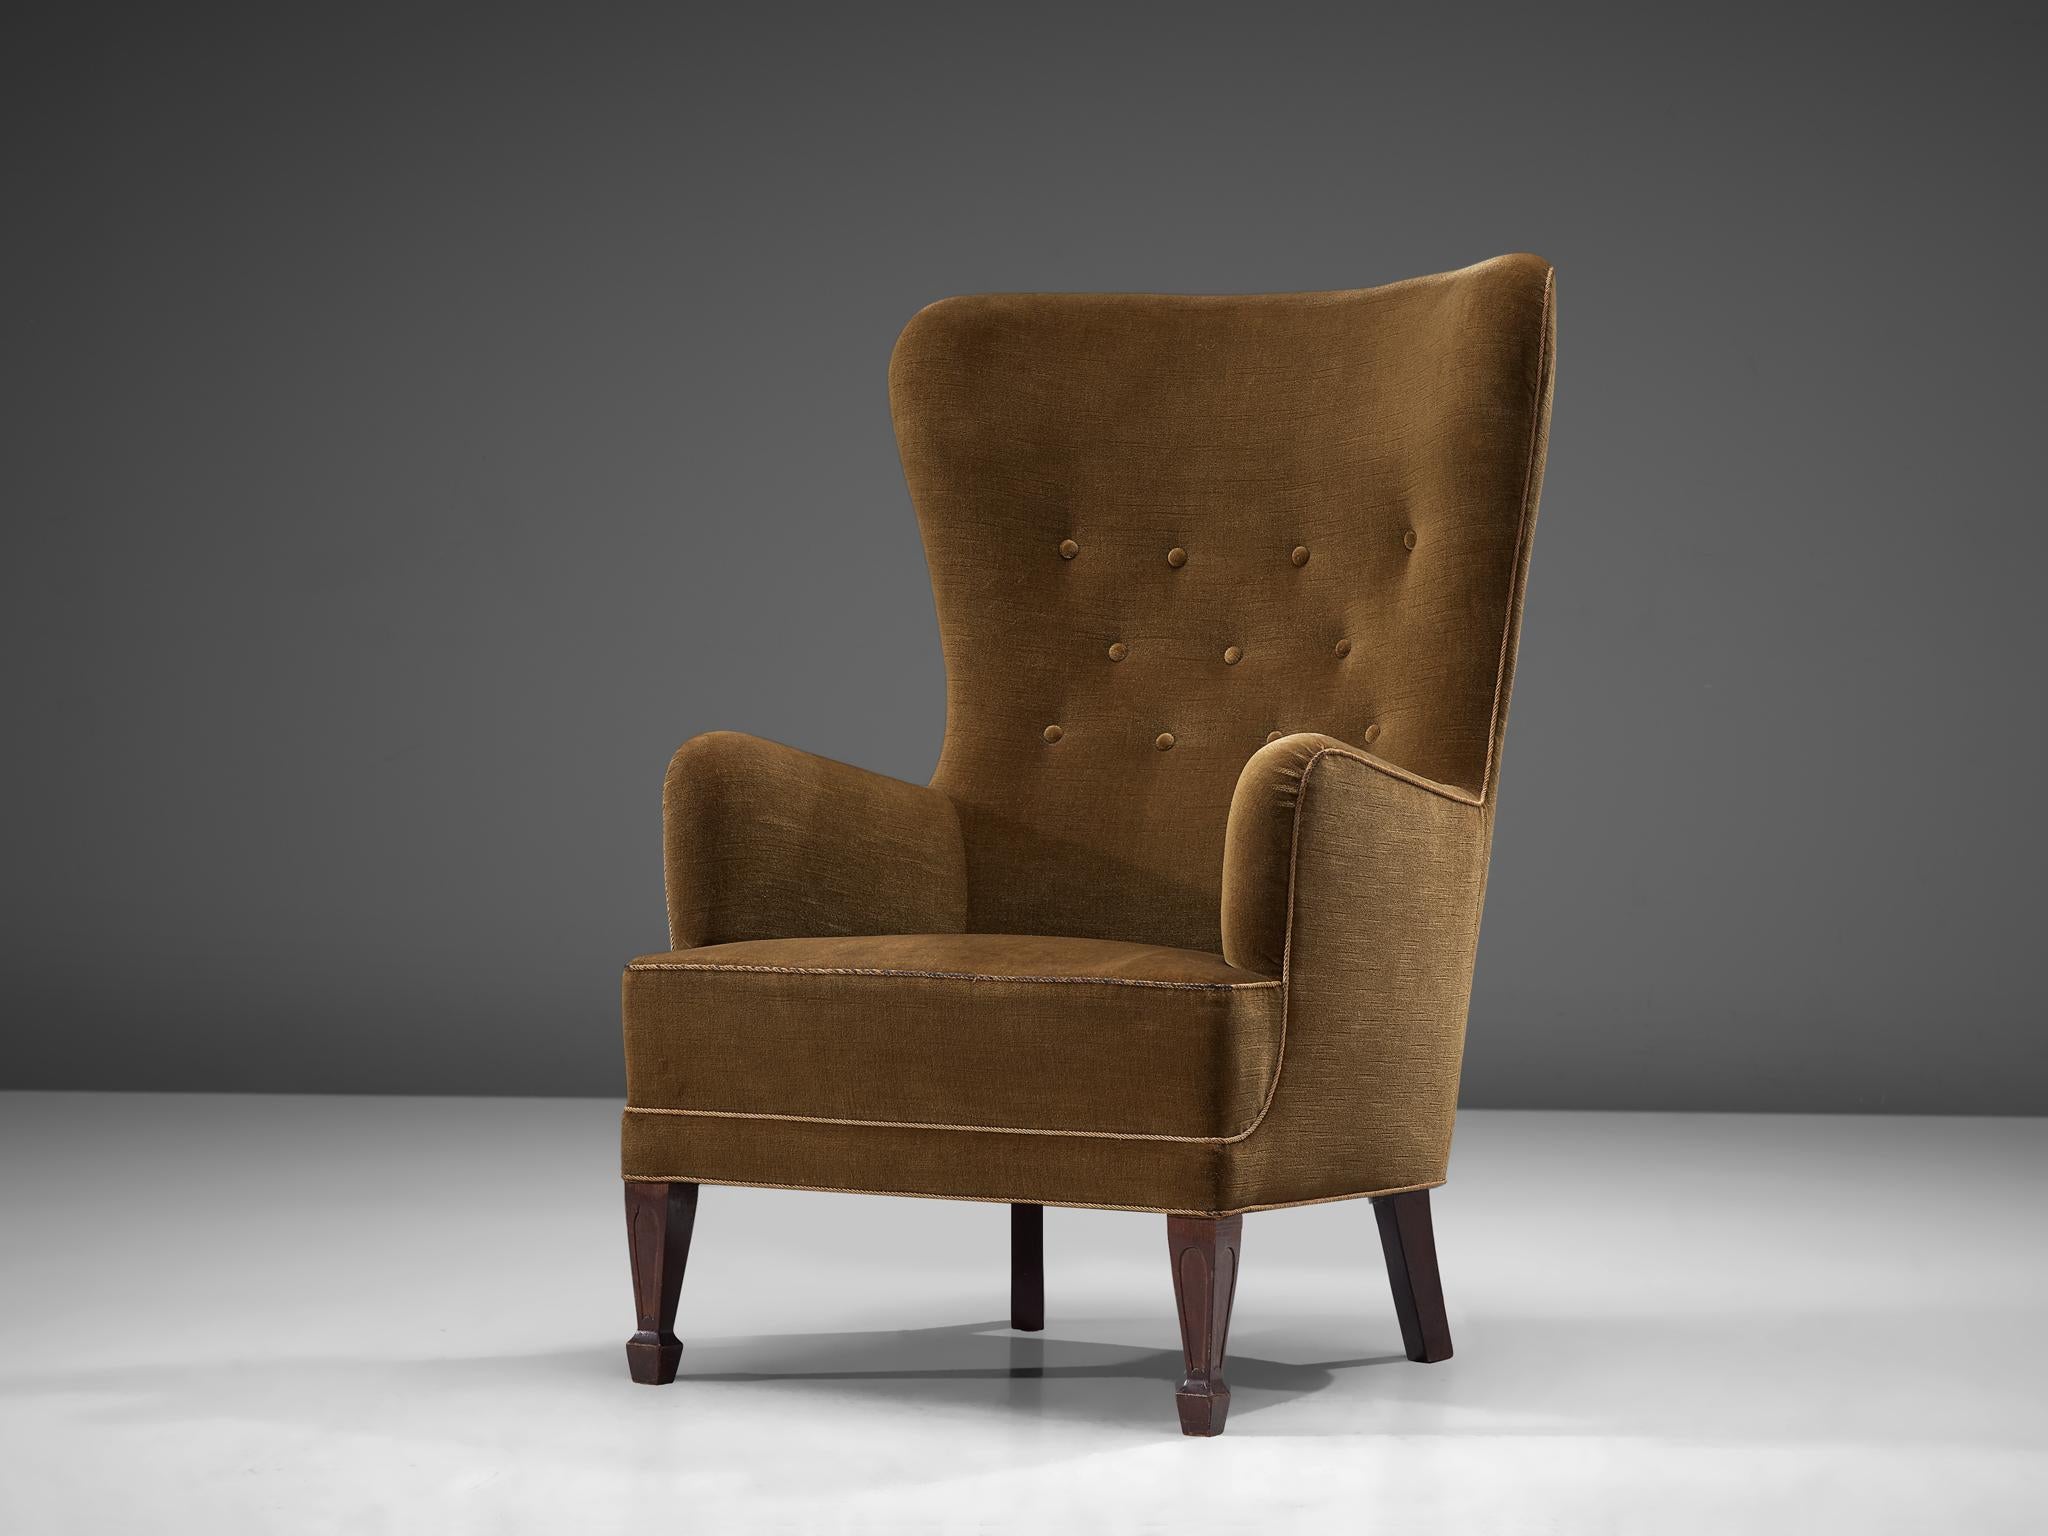 High back lounge chair by Frits Henningsen, Denmark, 1930s

This high back easy chair has legs made in stained mahogany. The seat, back and sides hold the original olive green woolen fabric.
The front legs show a refined detail, typical for the